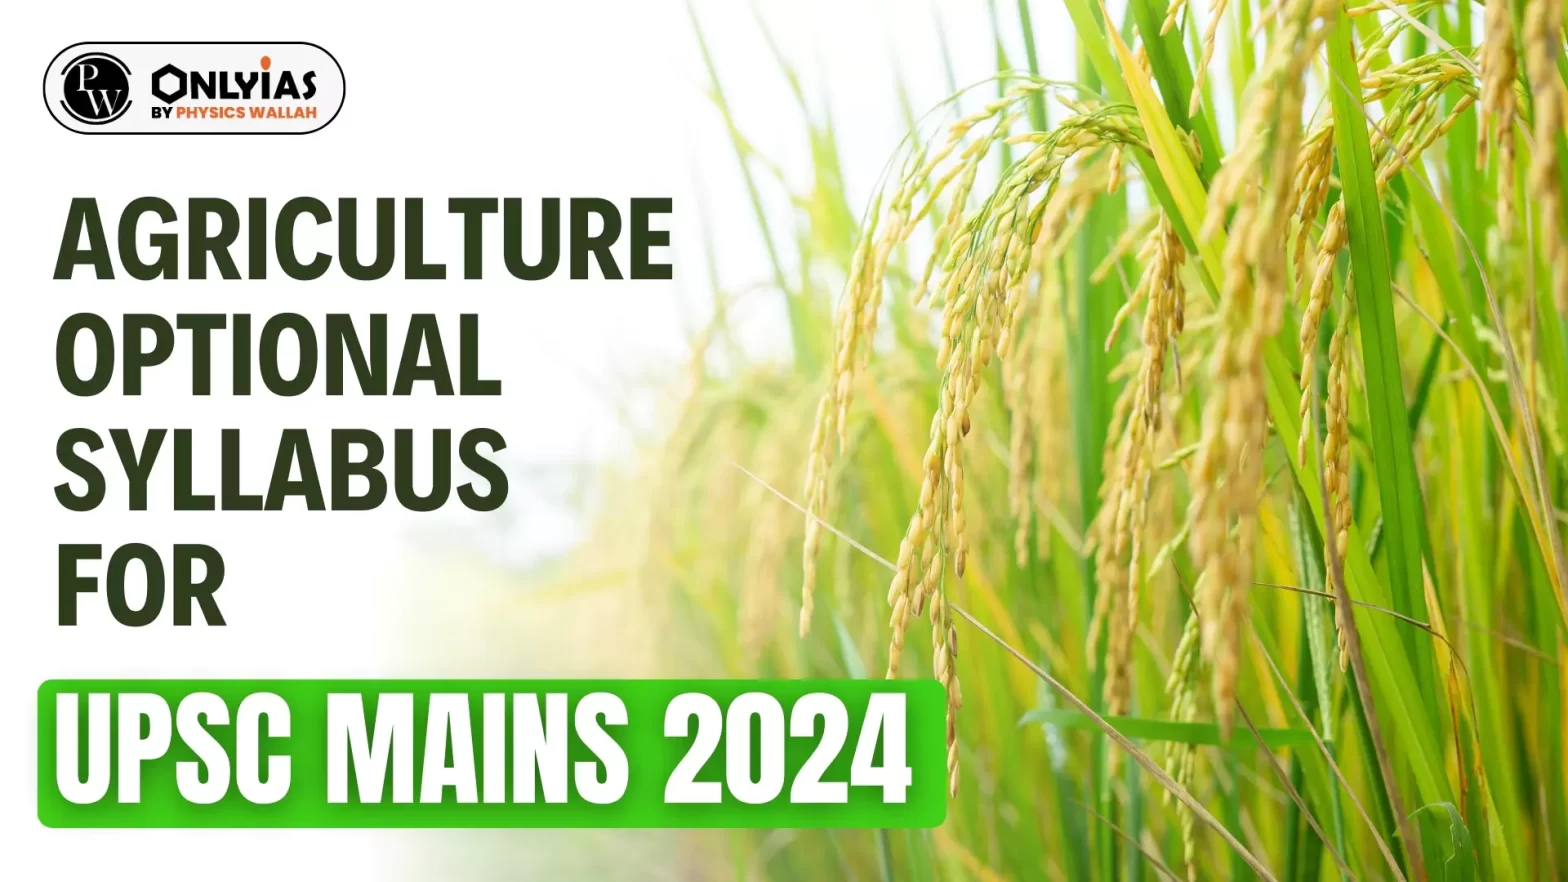 Agriculture Optional Syllabus for UPSC Mains 2024